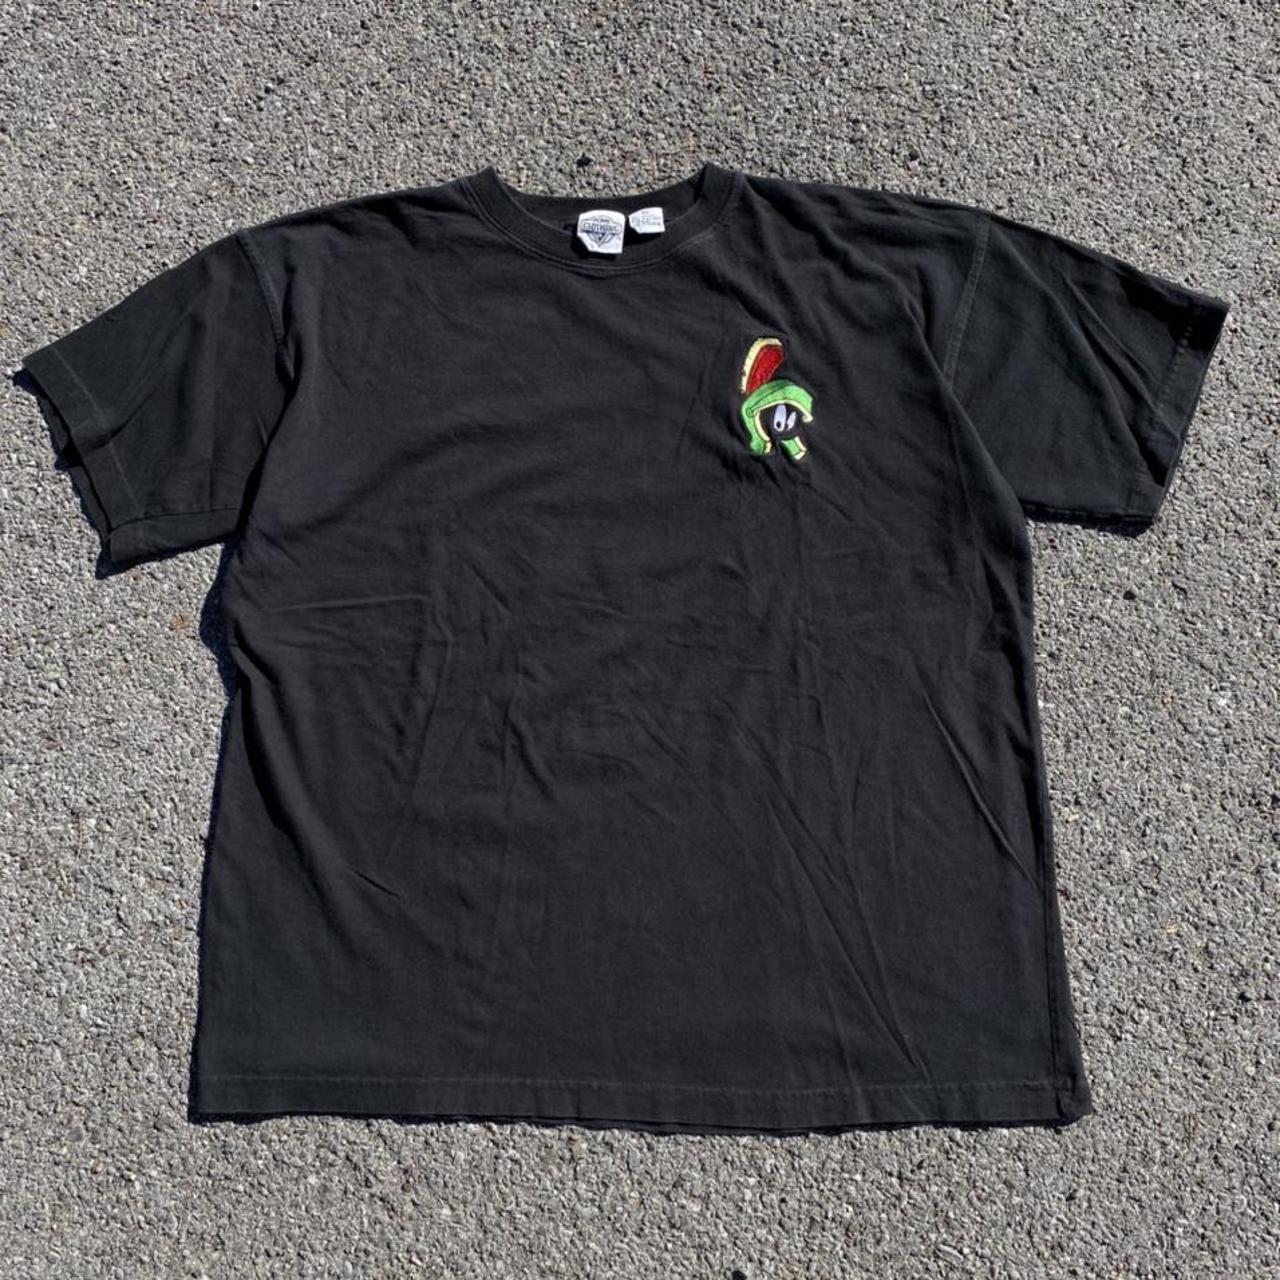 Product Image 2 - FREE SHIPPING!

Vintage 90s Marvin The